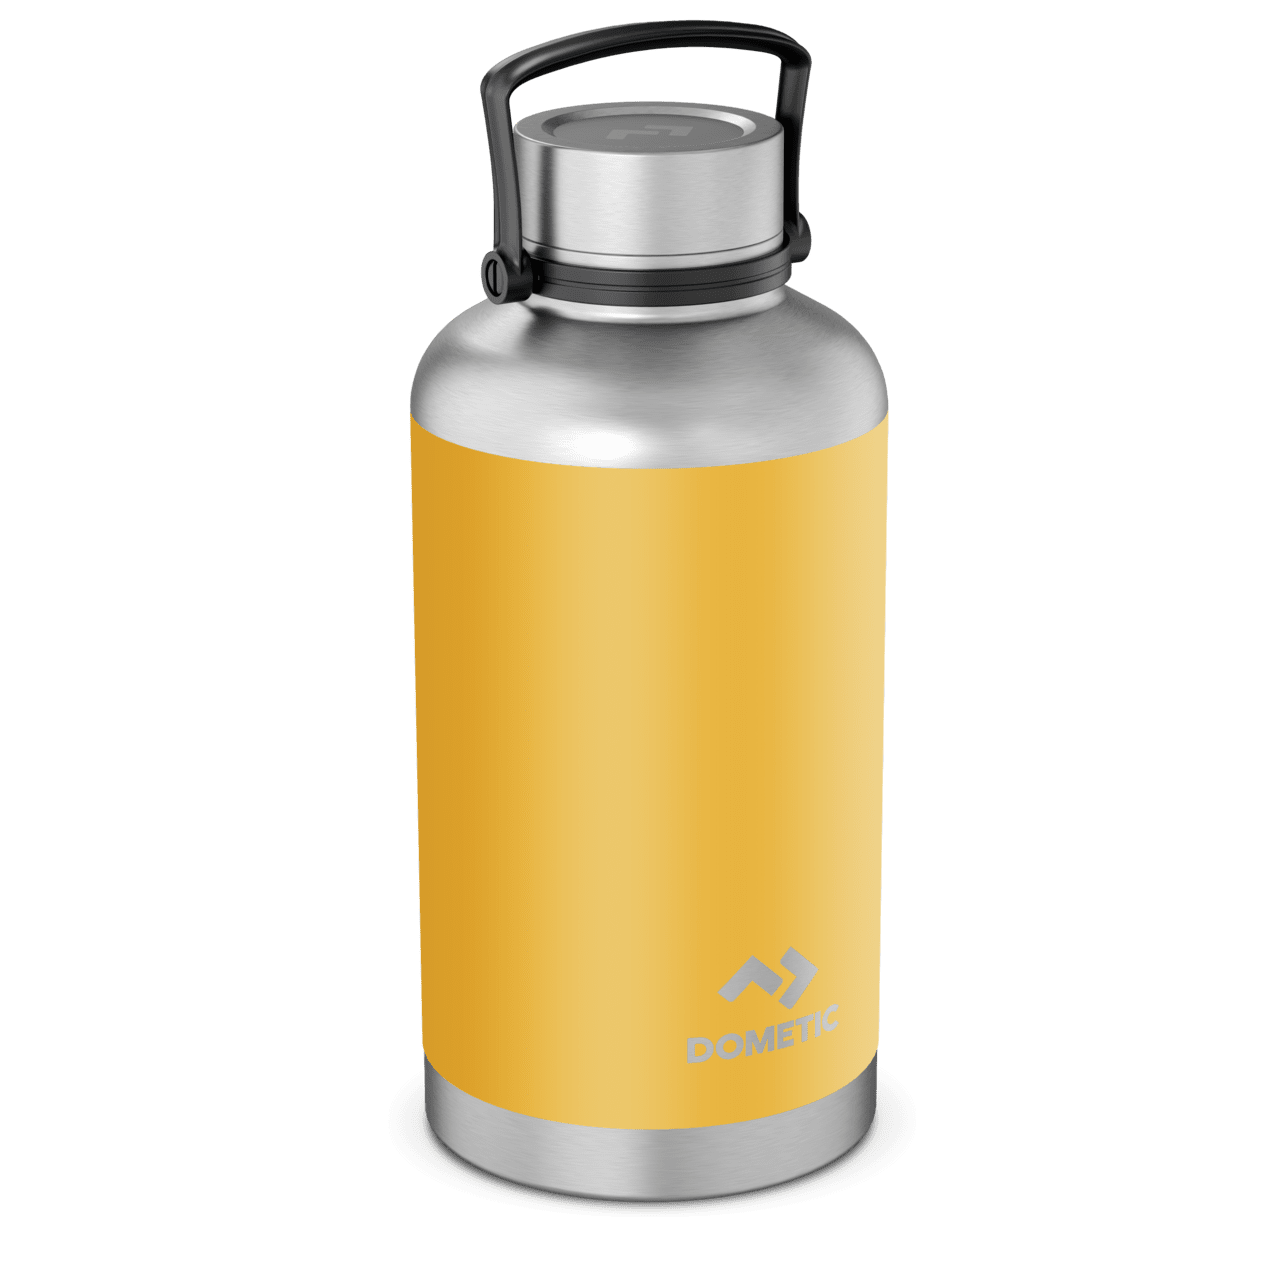 Dometic Thermo Bottle 192 Glow